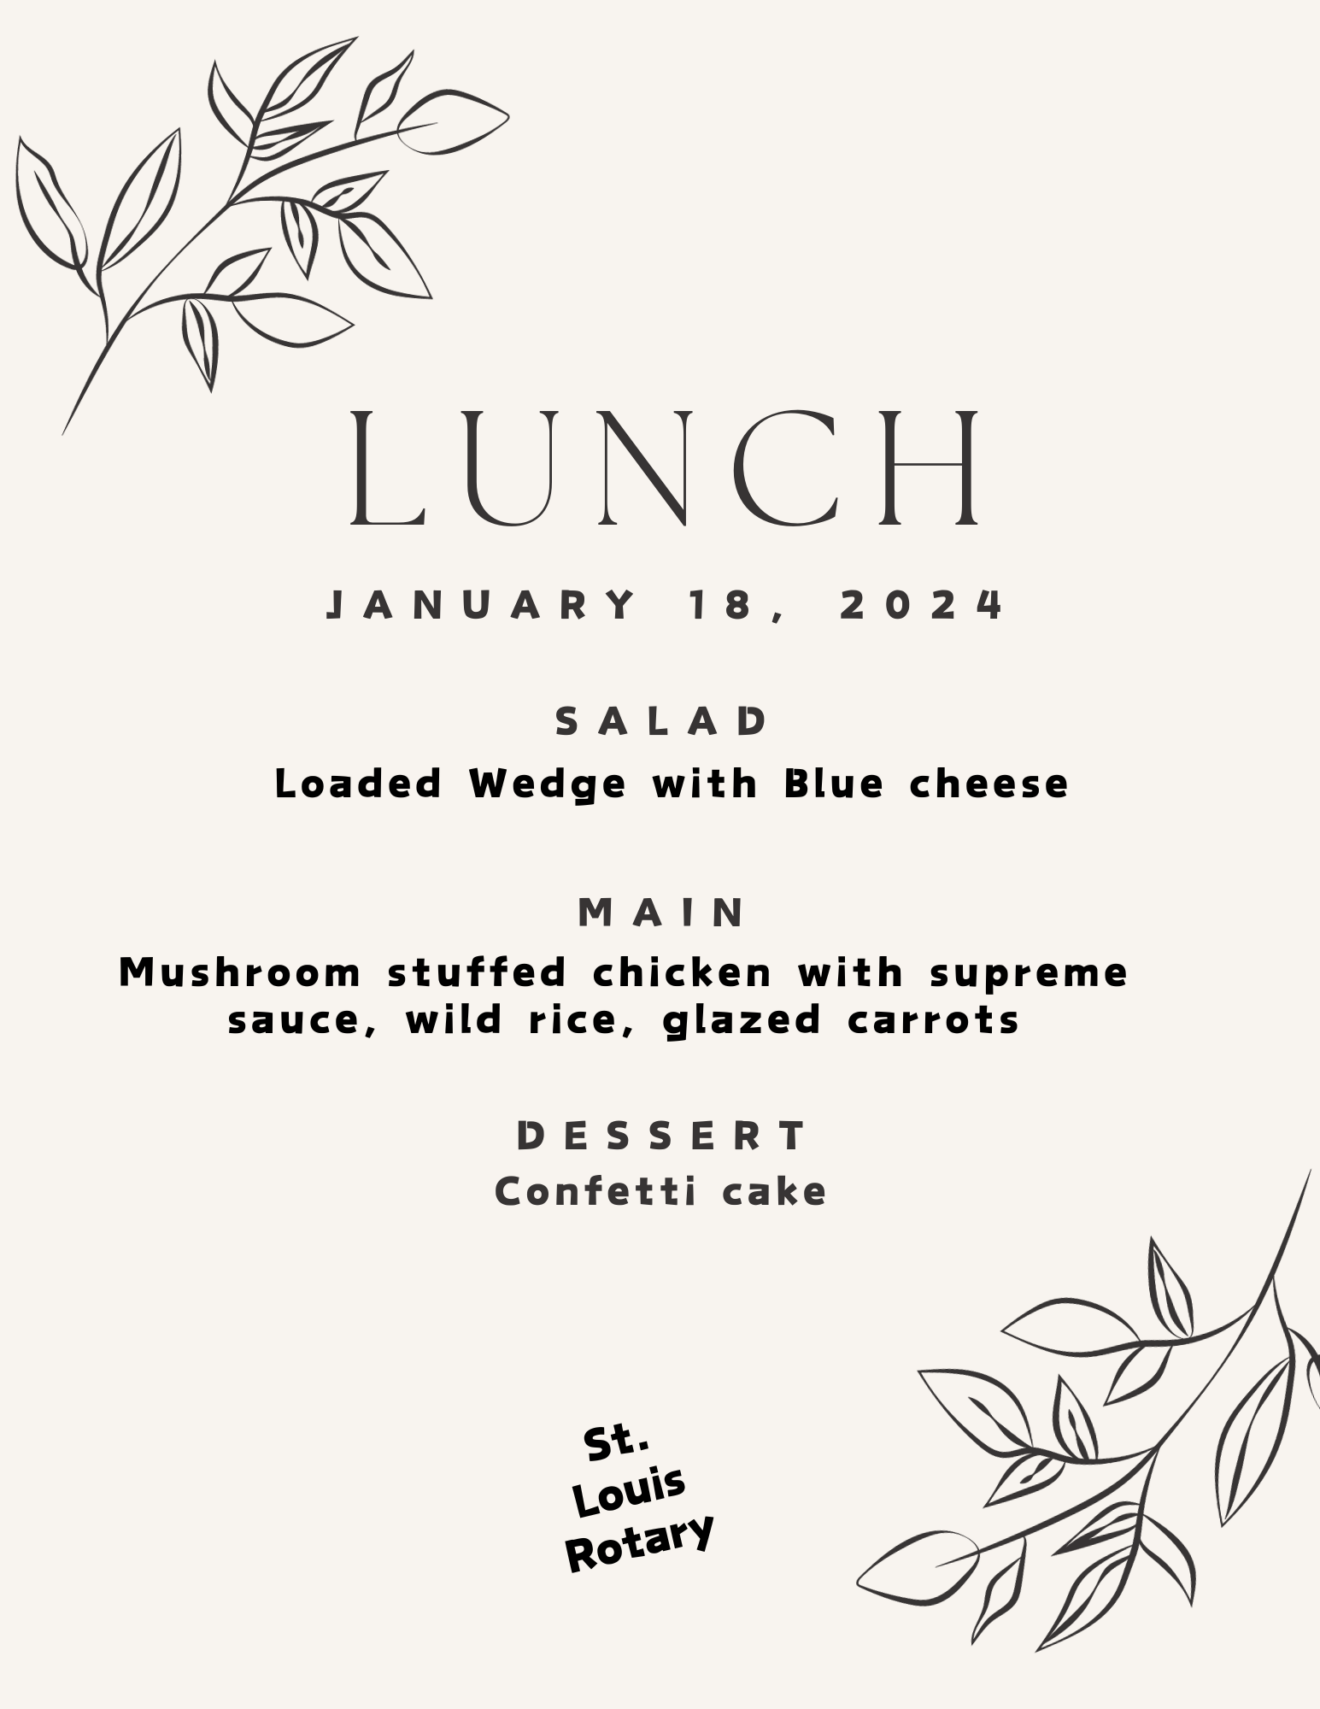 St. Louis Rotary Lunch menu 1-18-24